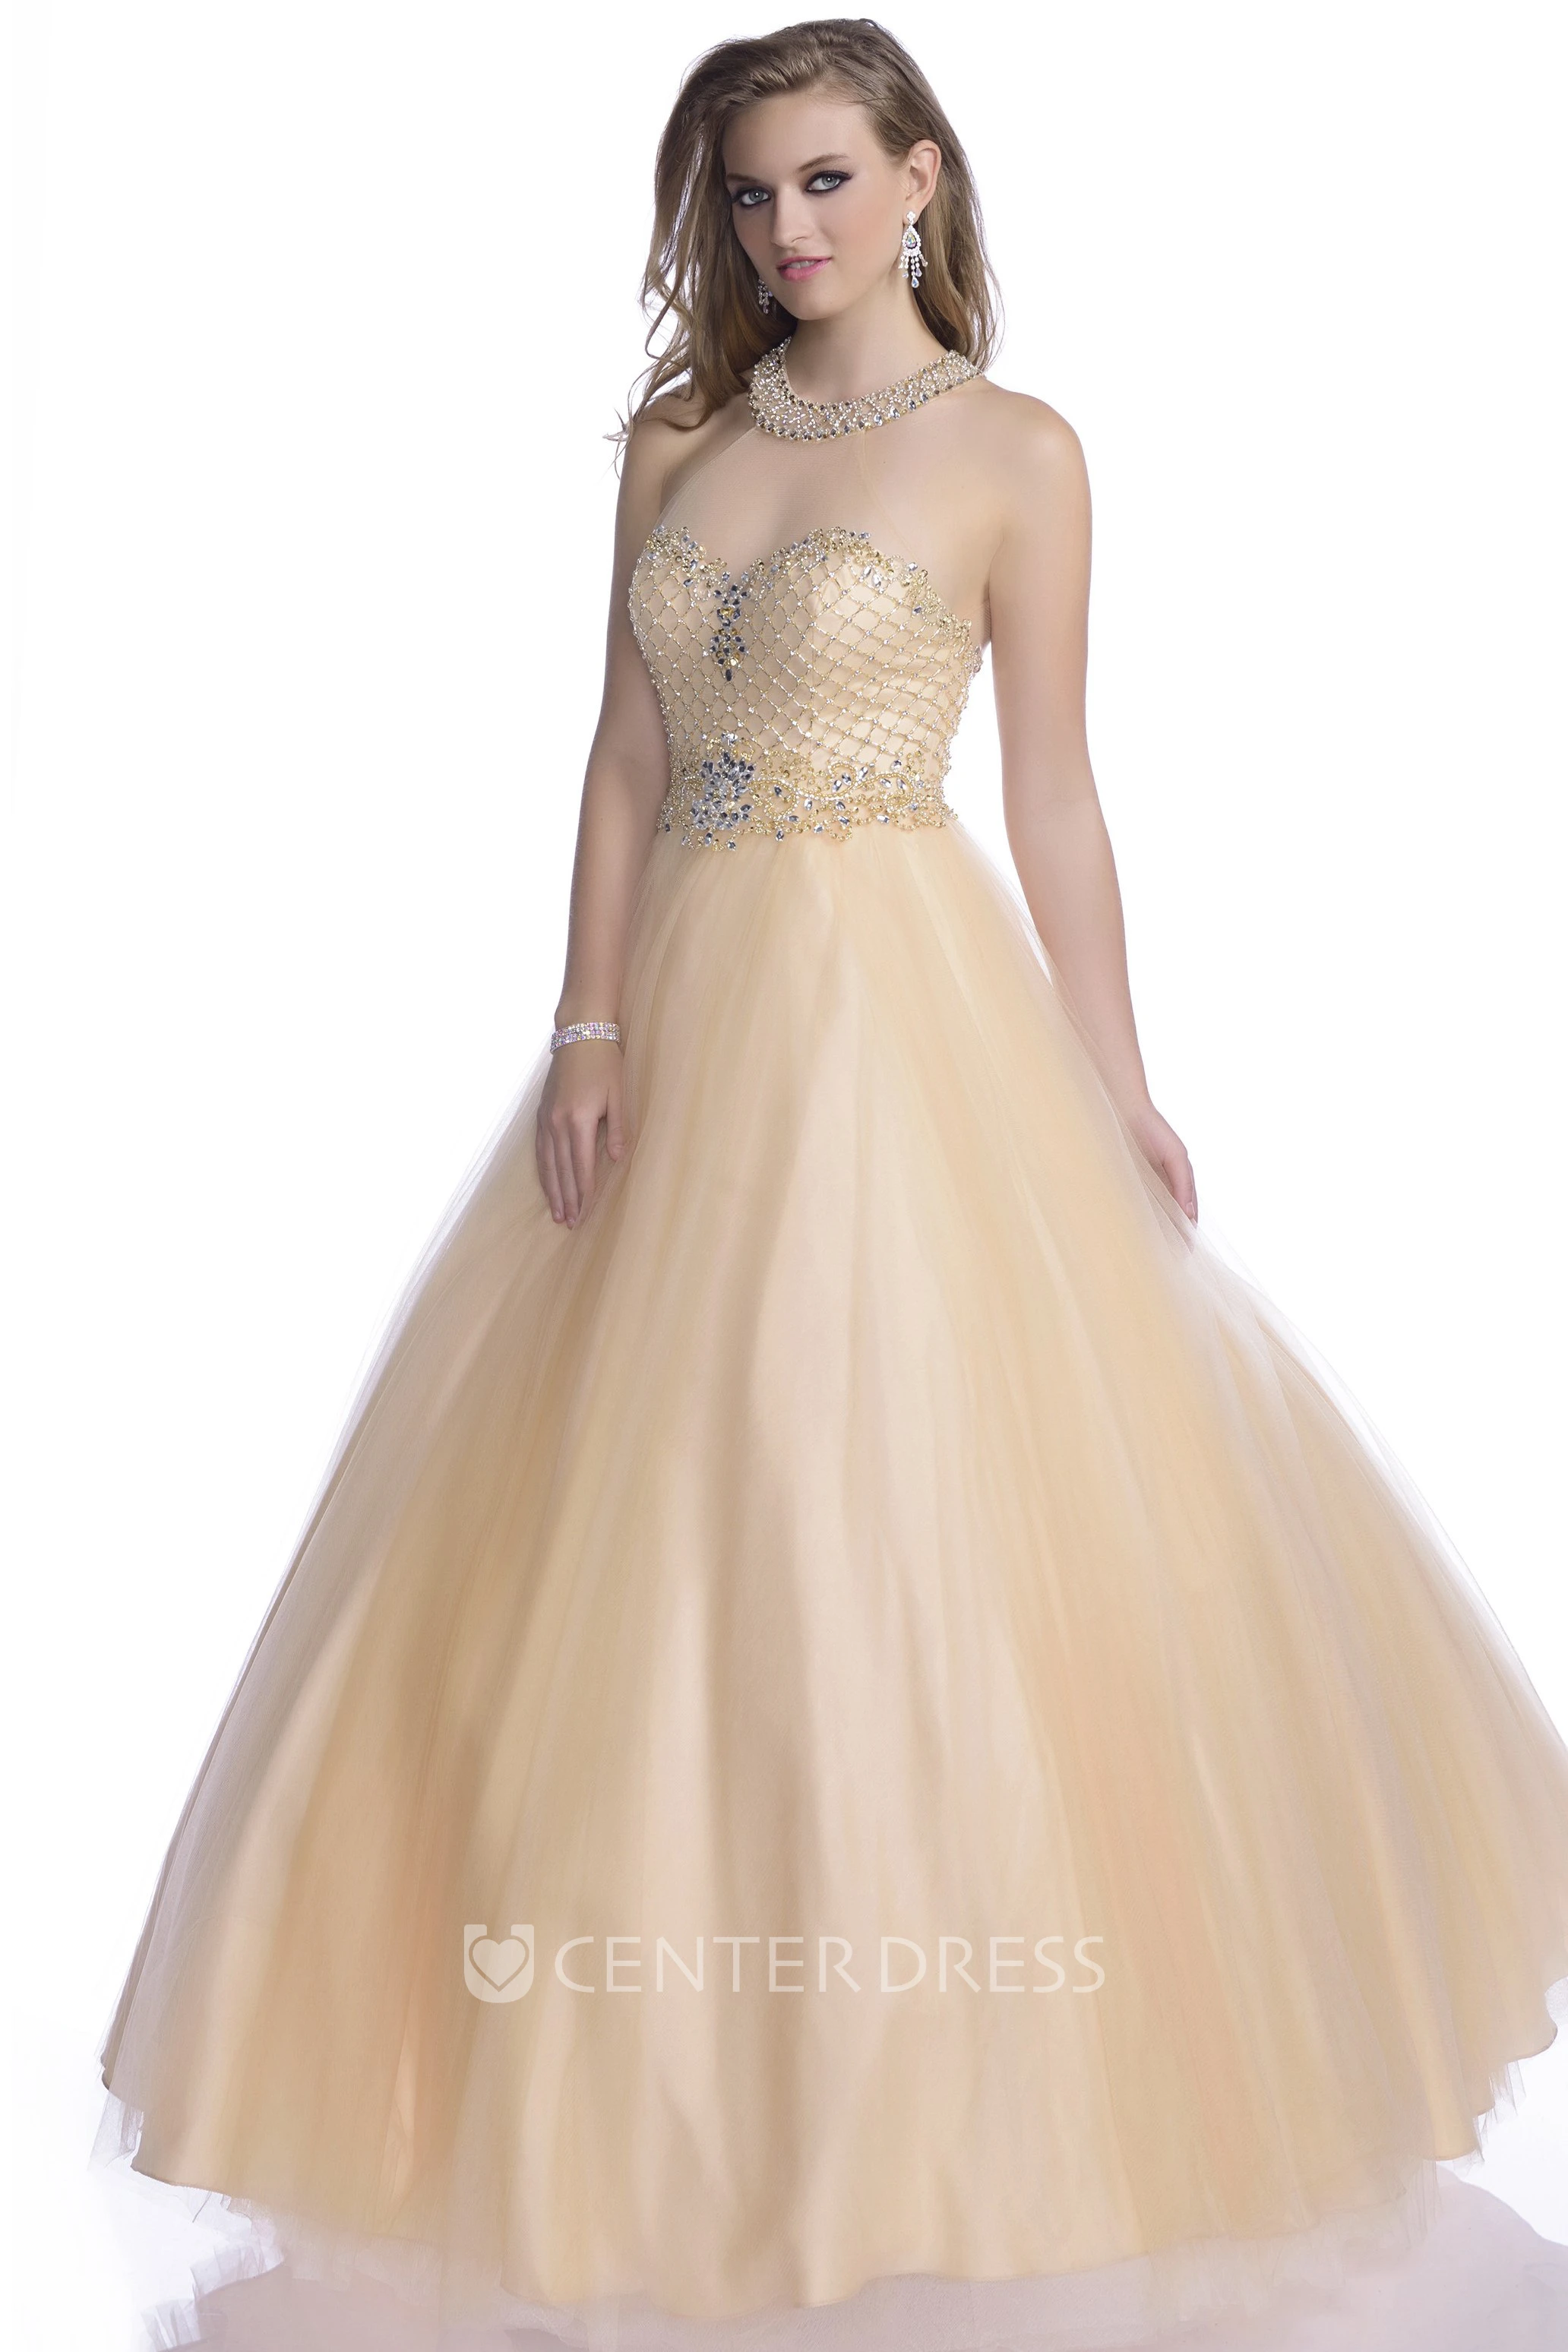 Sexy A-Line Sweetheart Tulle Prom Dress With Corset Back - UCenter